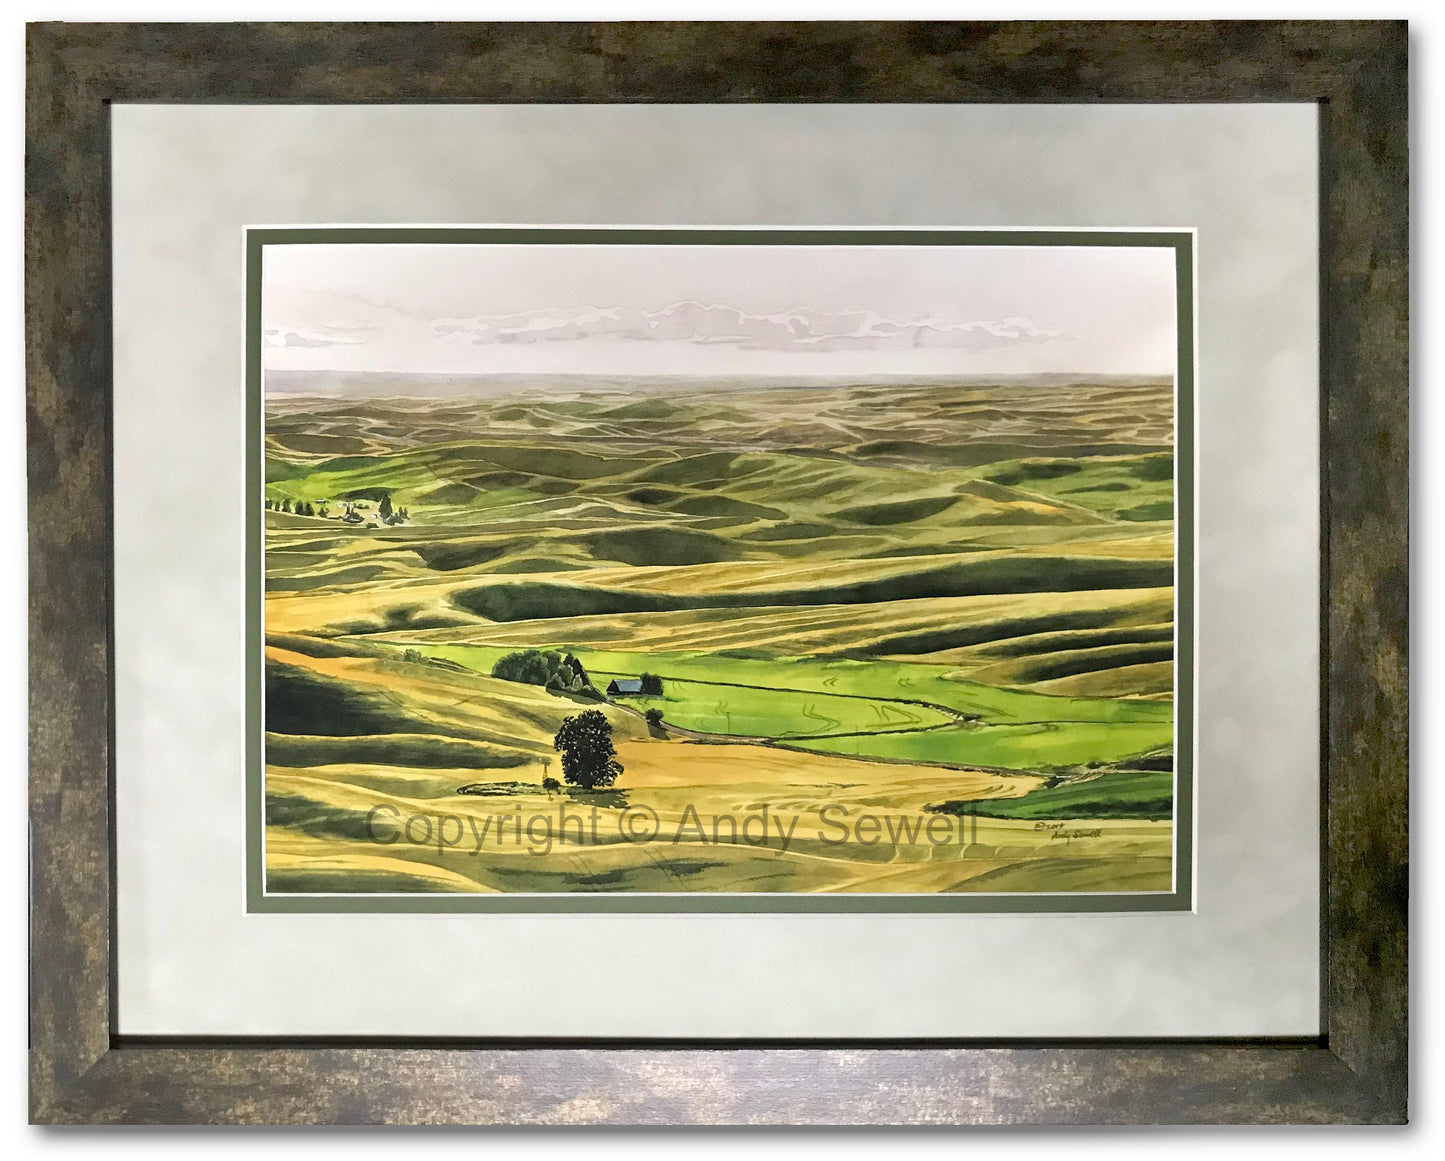 "Palouse Summer Glow" - An open edition Giclee reprod. from an Original watercolor of the Northwest Palouse country landscape - by Andy Sewell